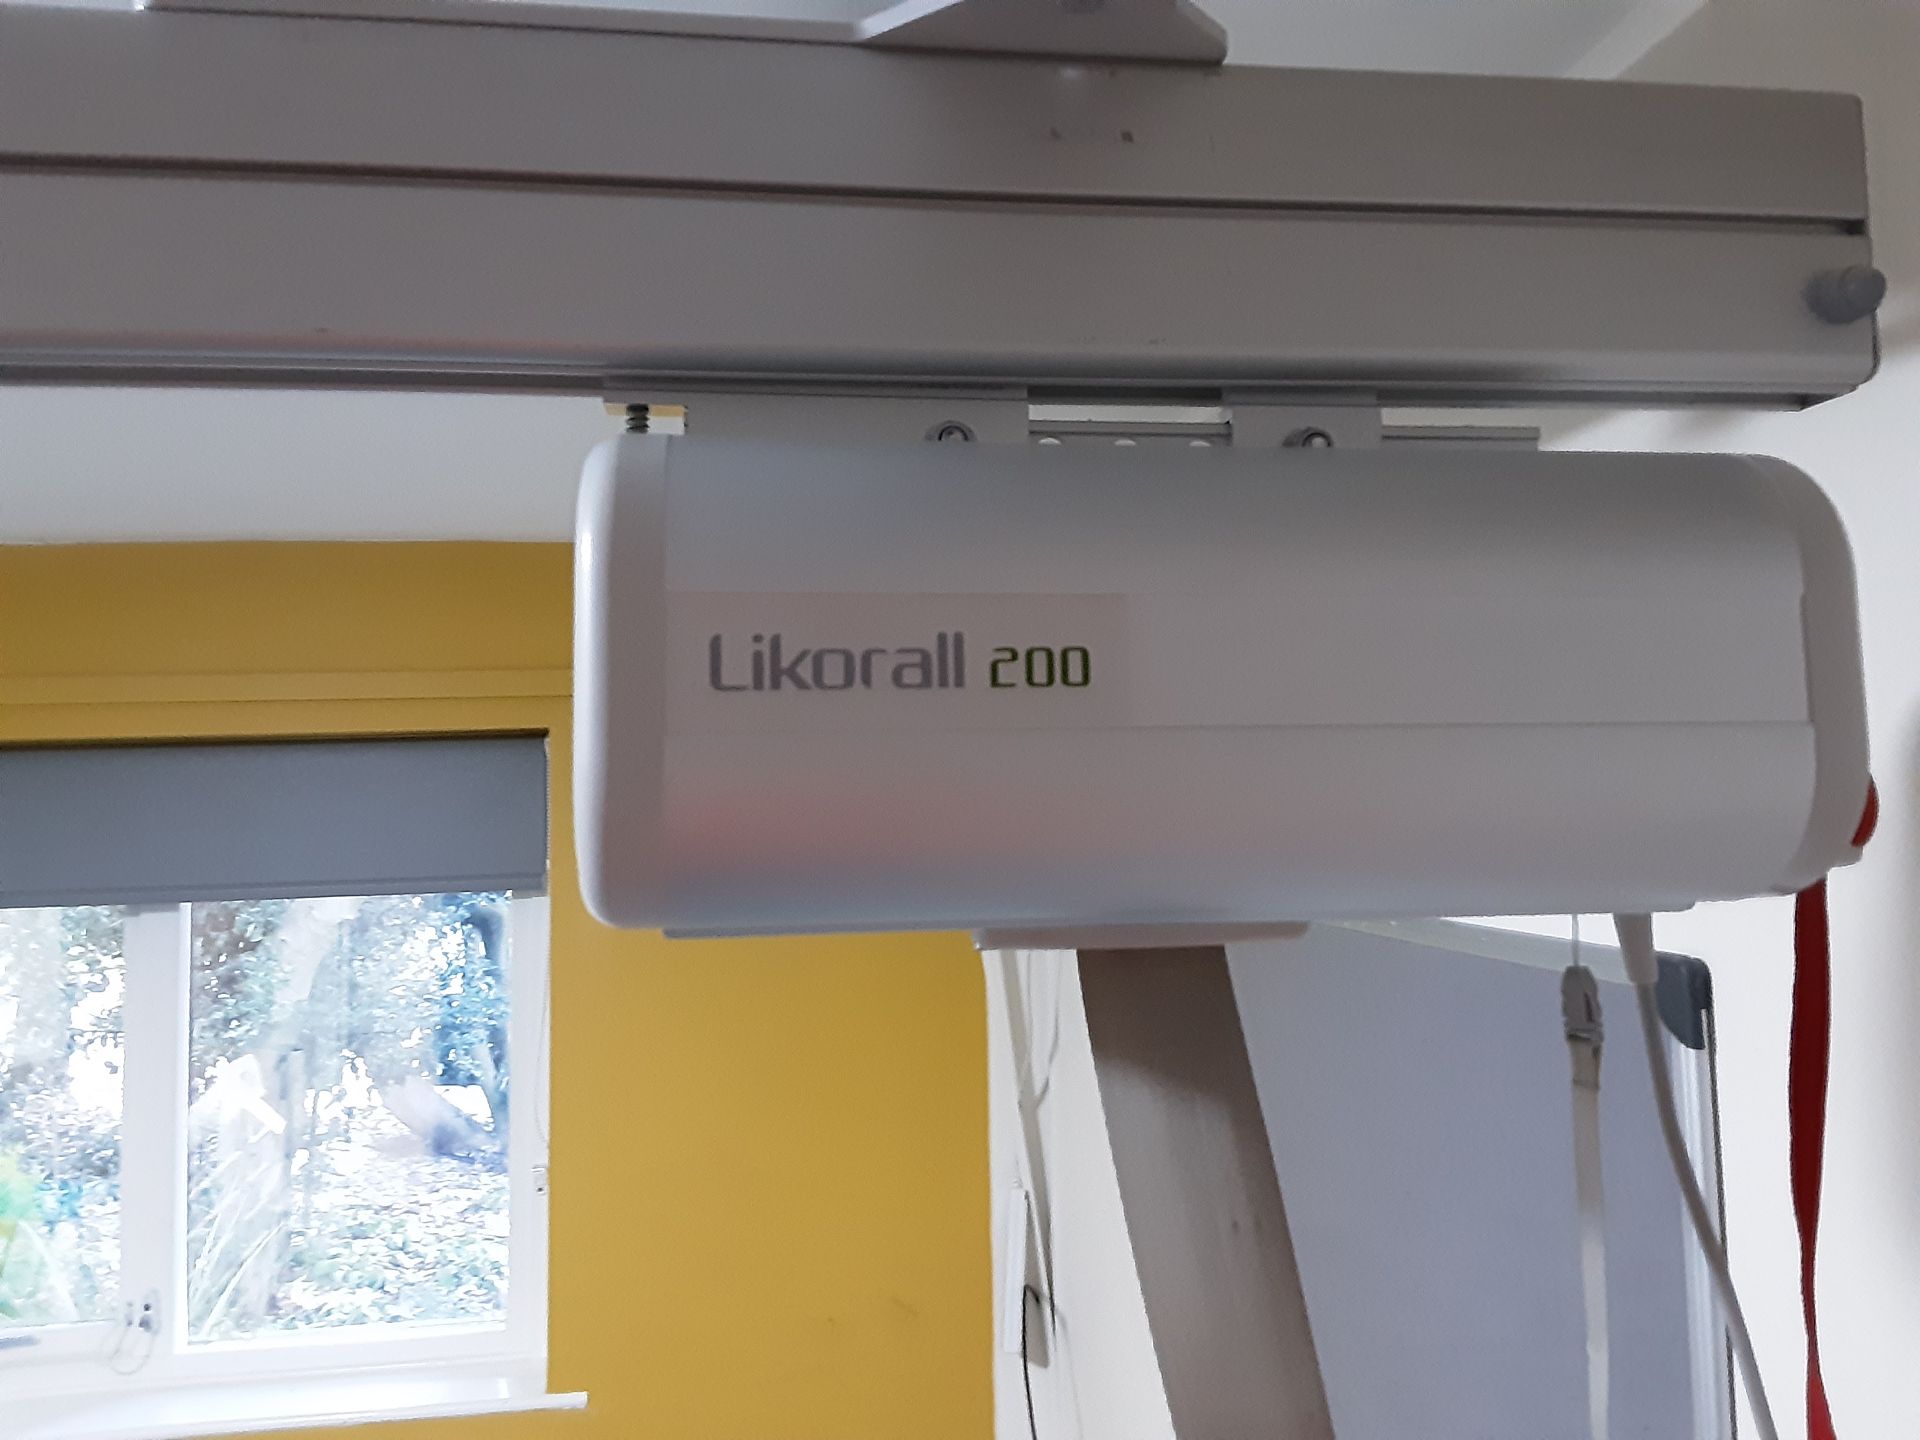 Likorall 200kg Patient Lift with KwikTrak Ceiling Rail System Serial No: 8707849 - Image 6 of 10